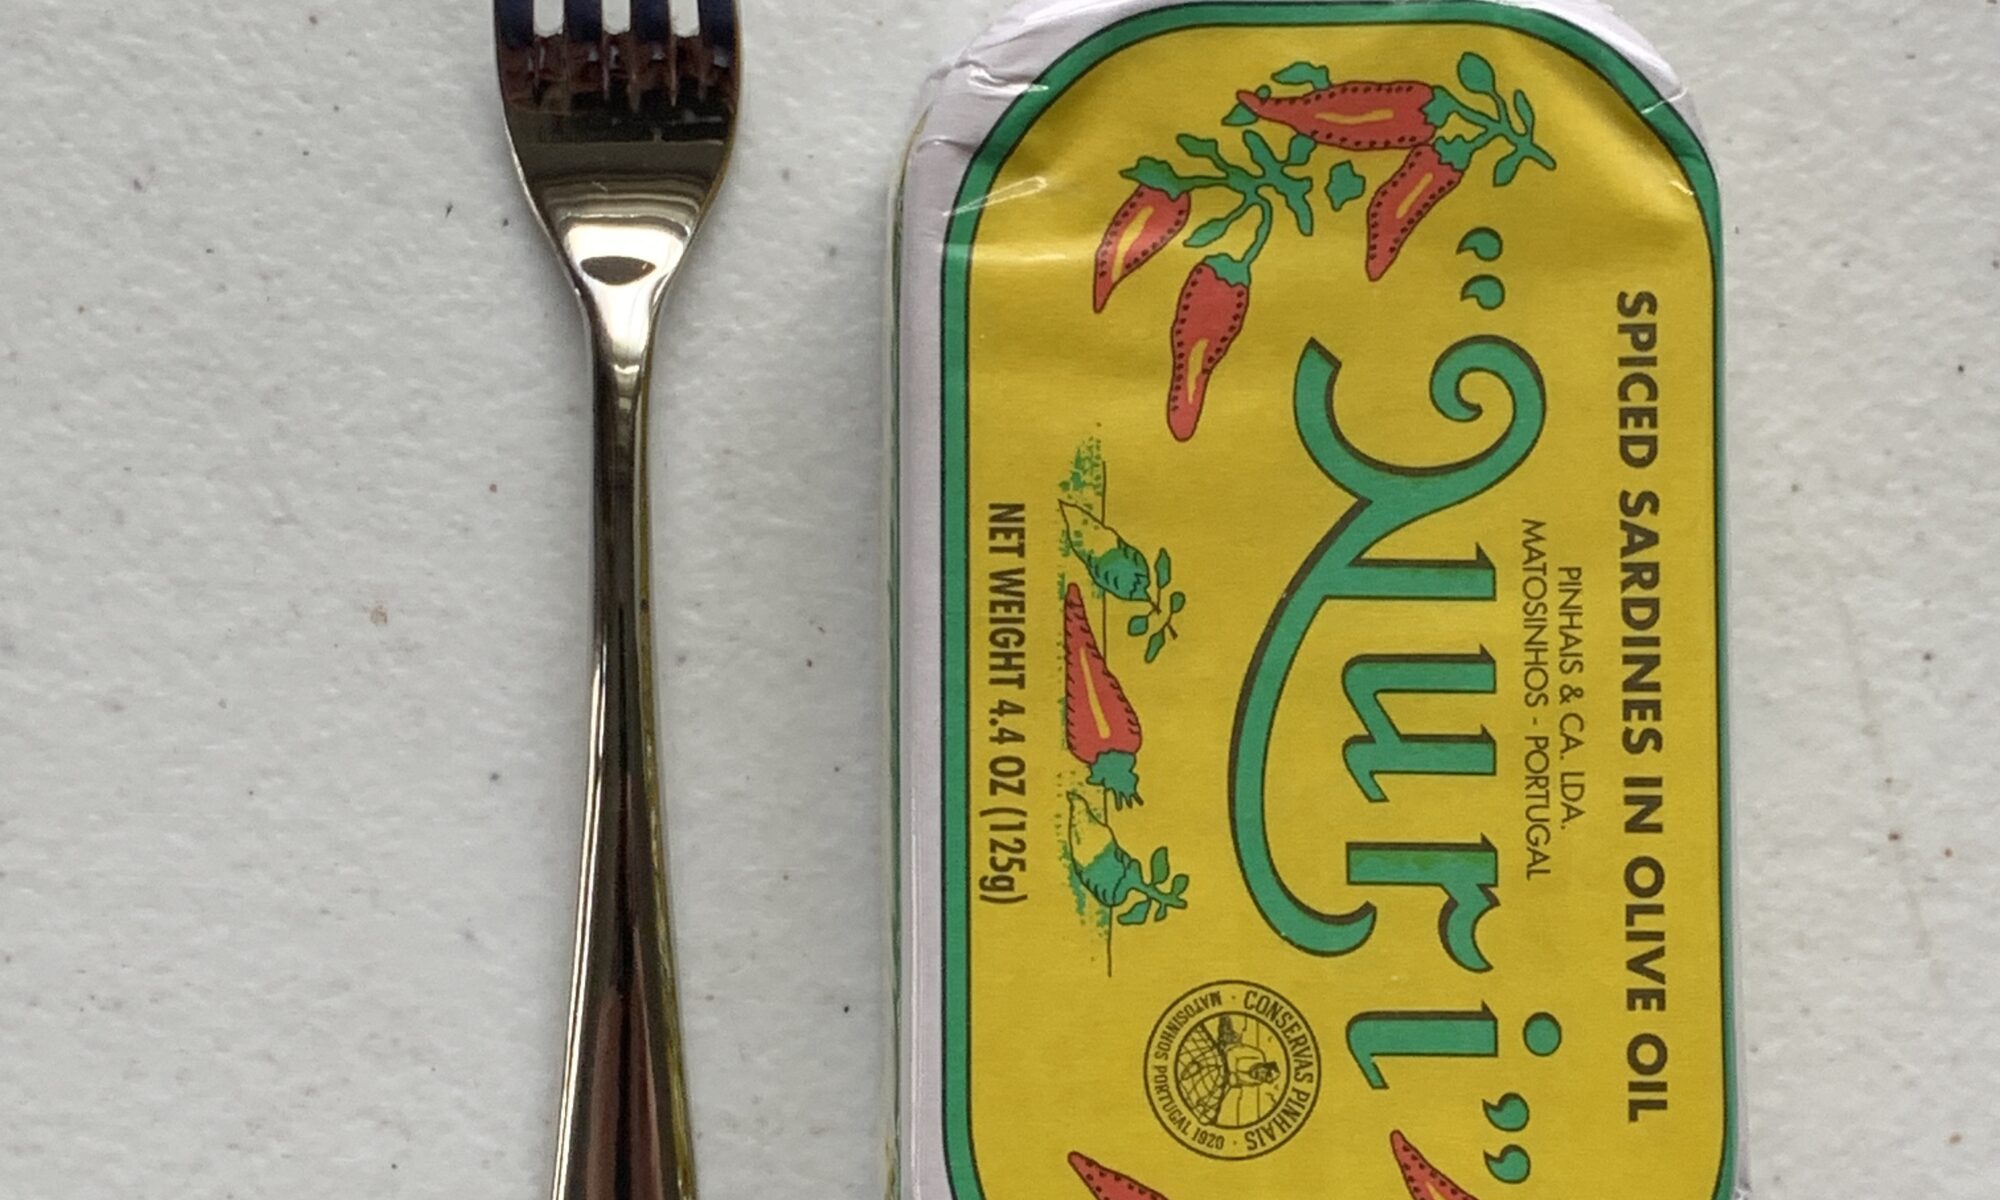 Image of a Cocktail Fork, Acopa Remy, Stainless Steel, Extra Heavy Weight next to a tin of sardines for scale.